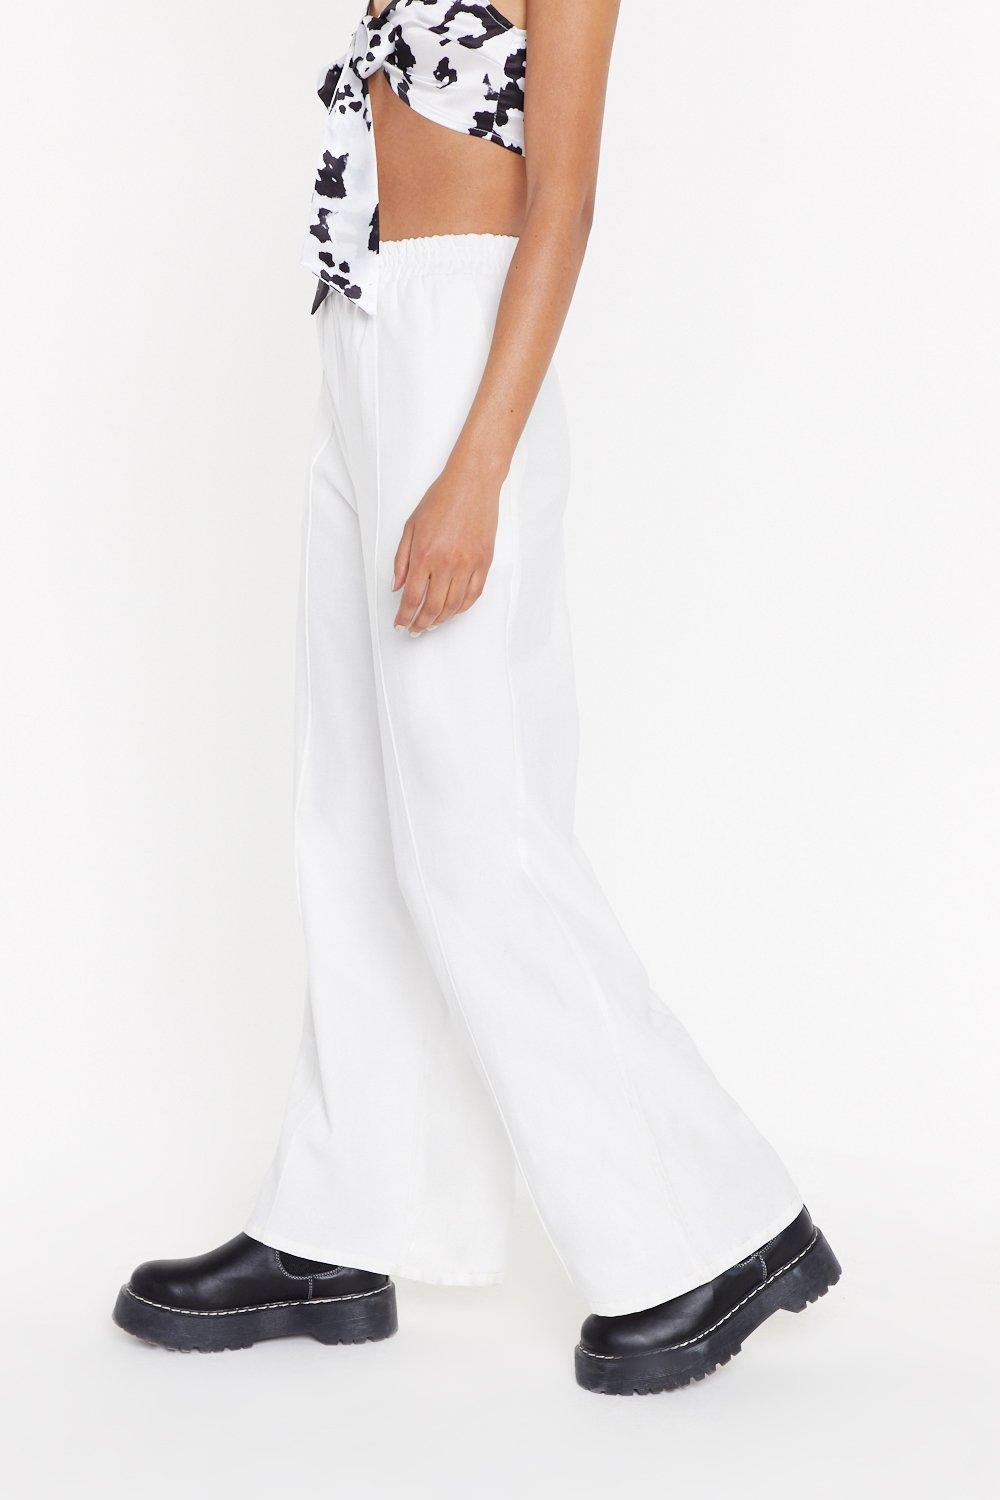 Thoughts on front seam pants? : r/femalefashionadvice